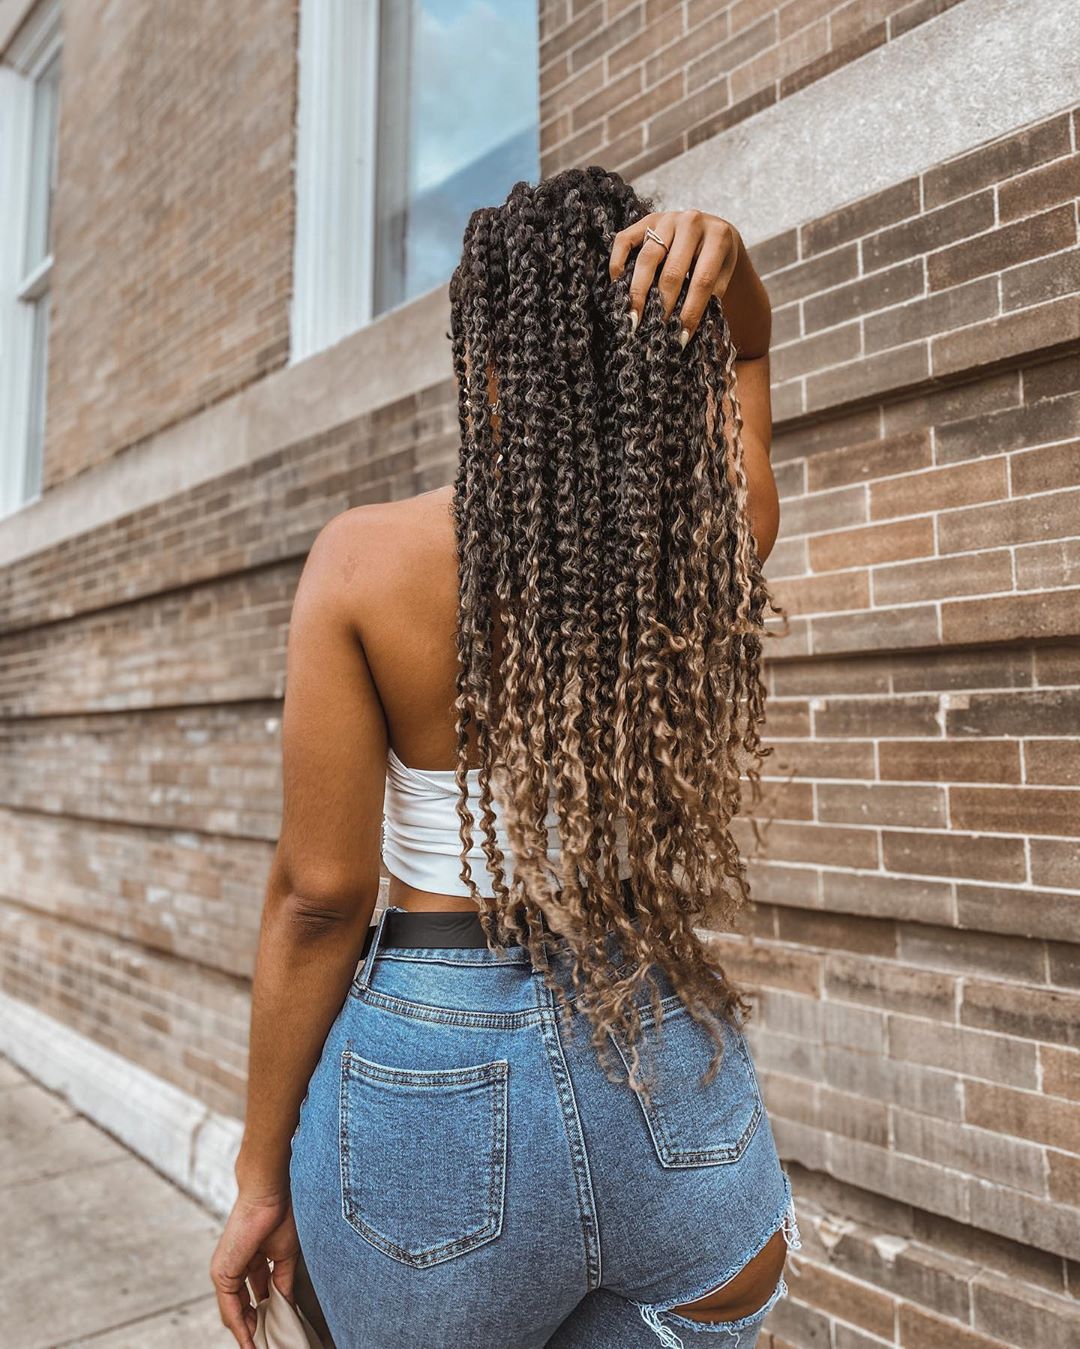 Marley Braids / Twists Hairstyles - Latest Trends in African Hair Braiding